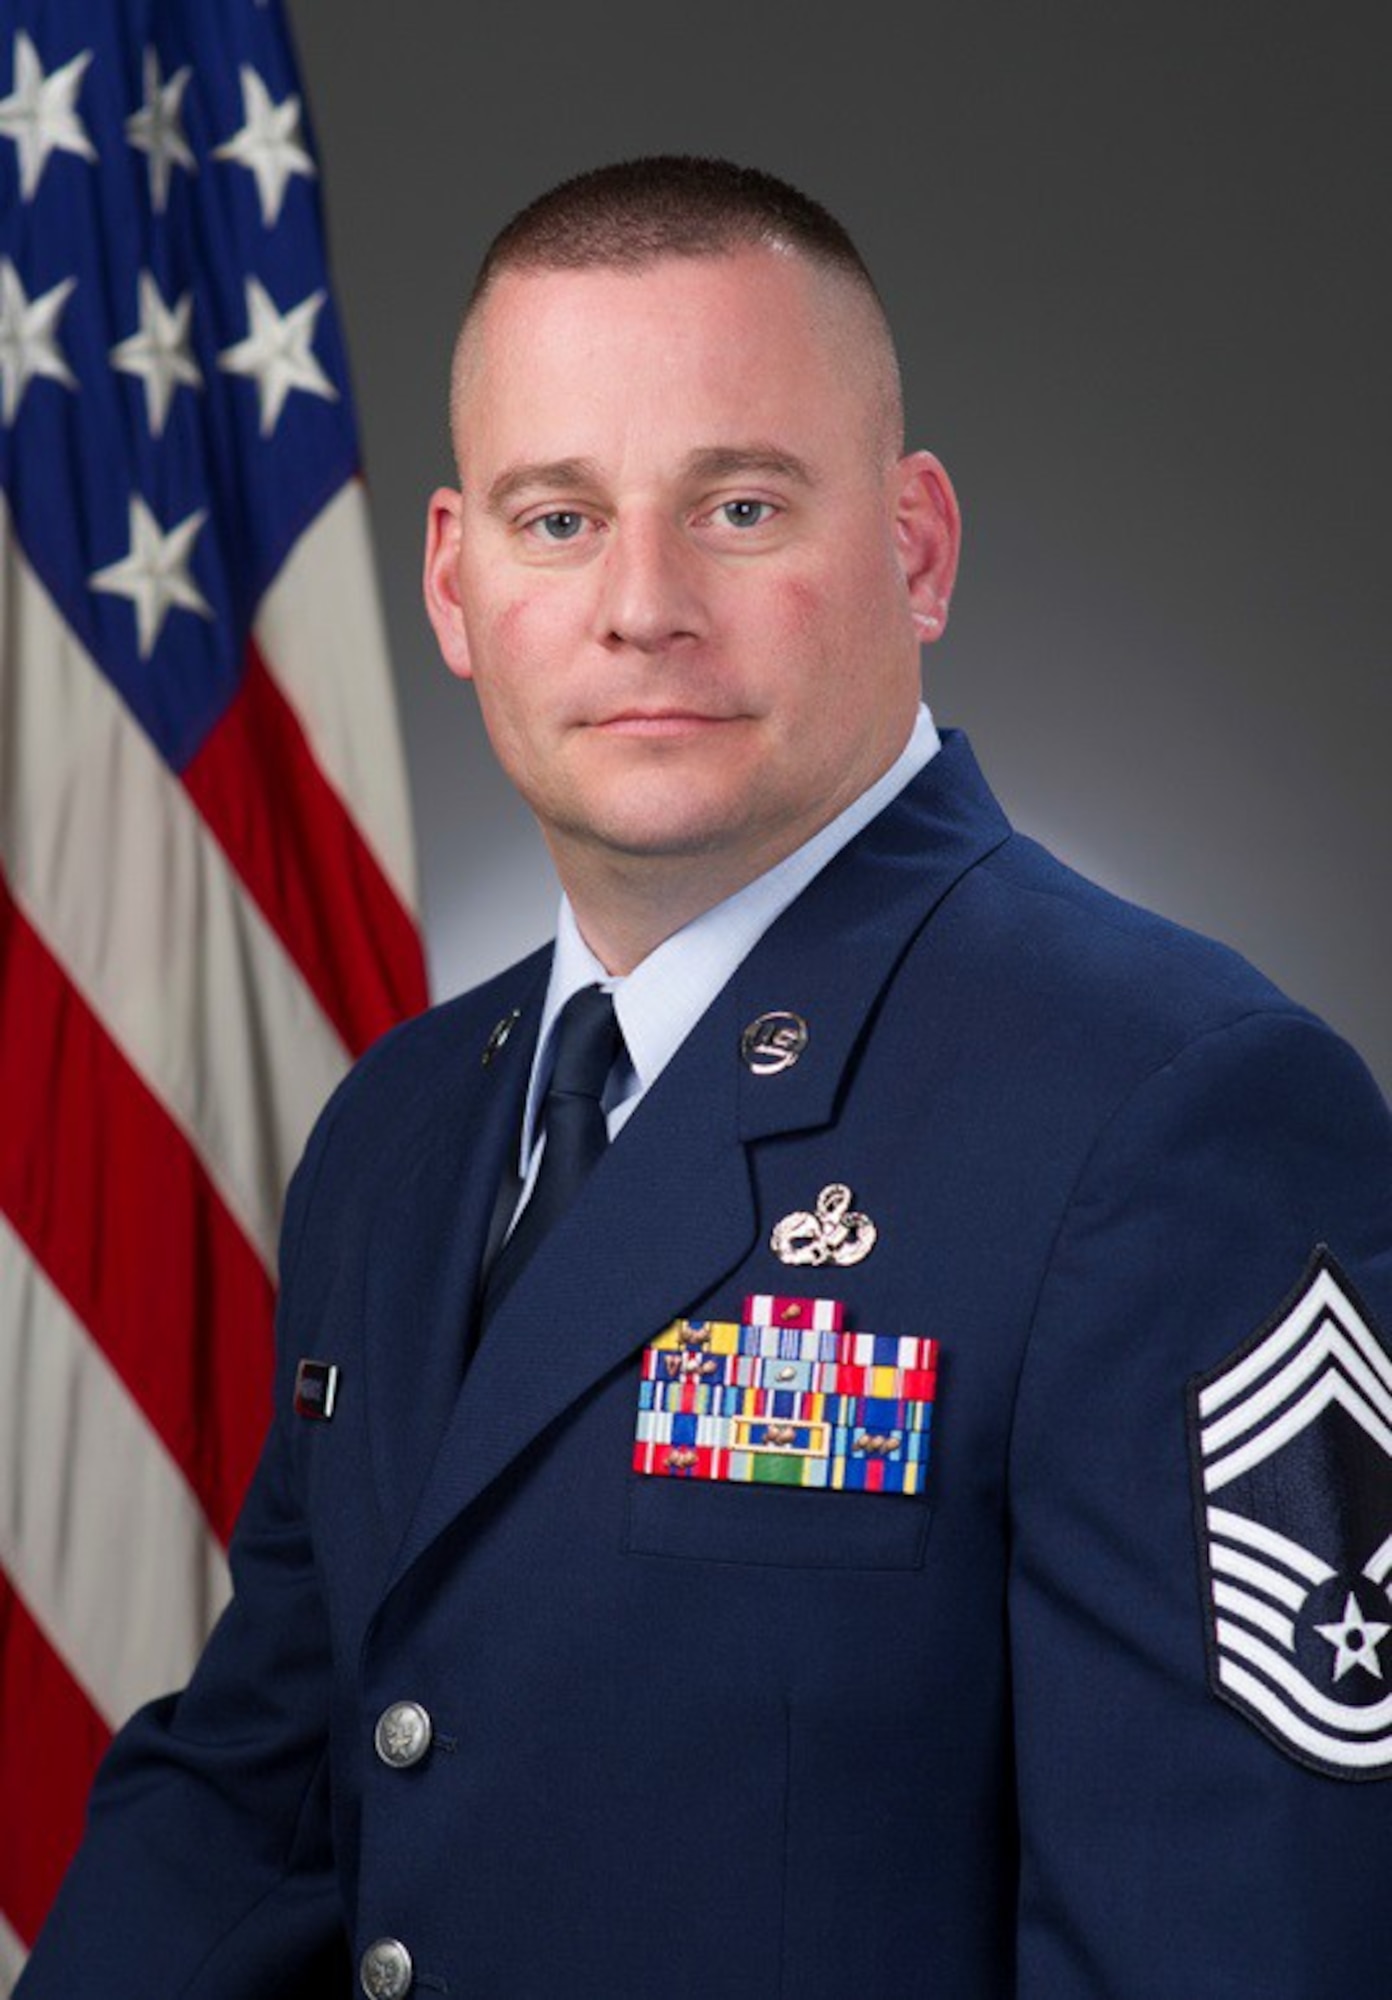 Chief Master Sgt. Jason Morehouse, Official Photo, U.S. Air Force